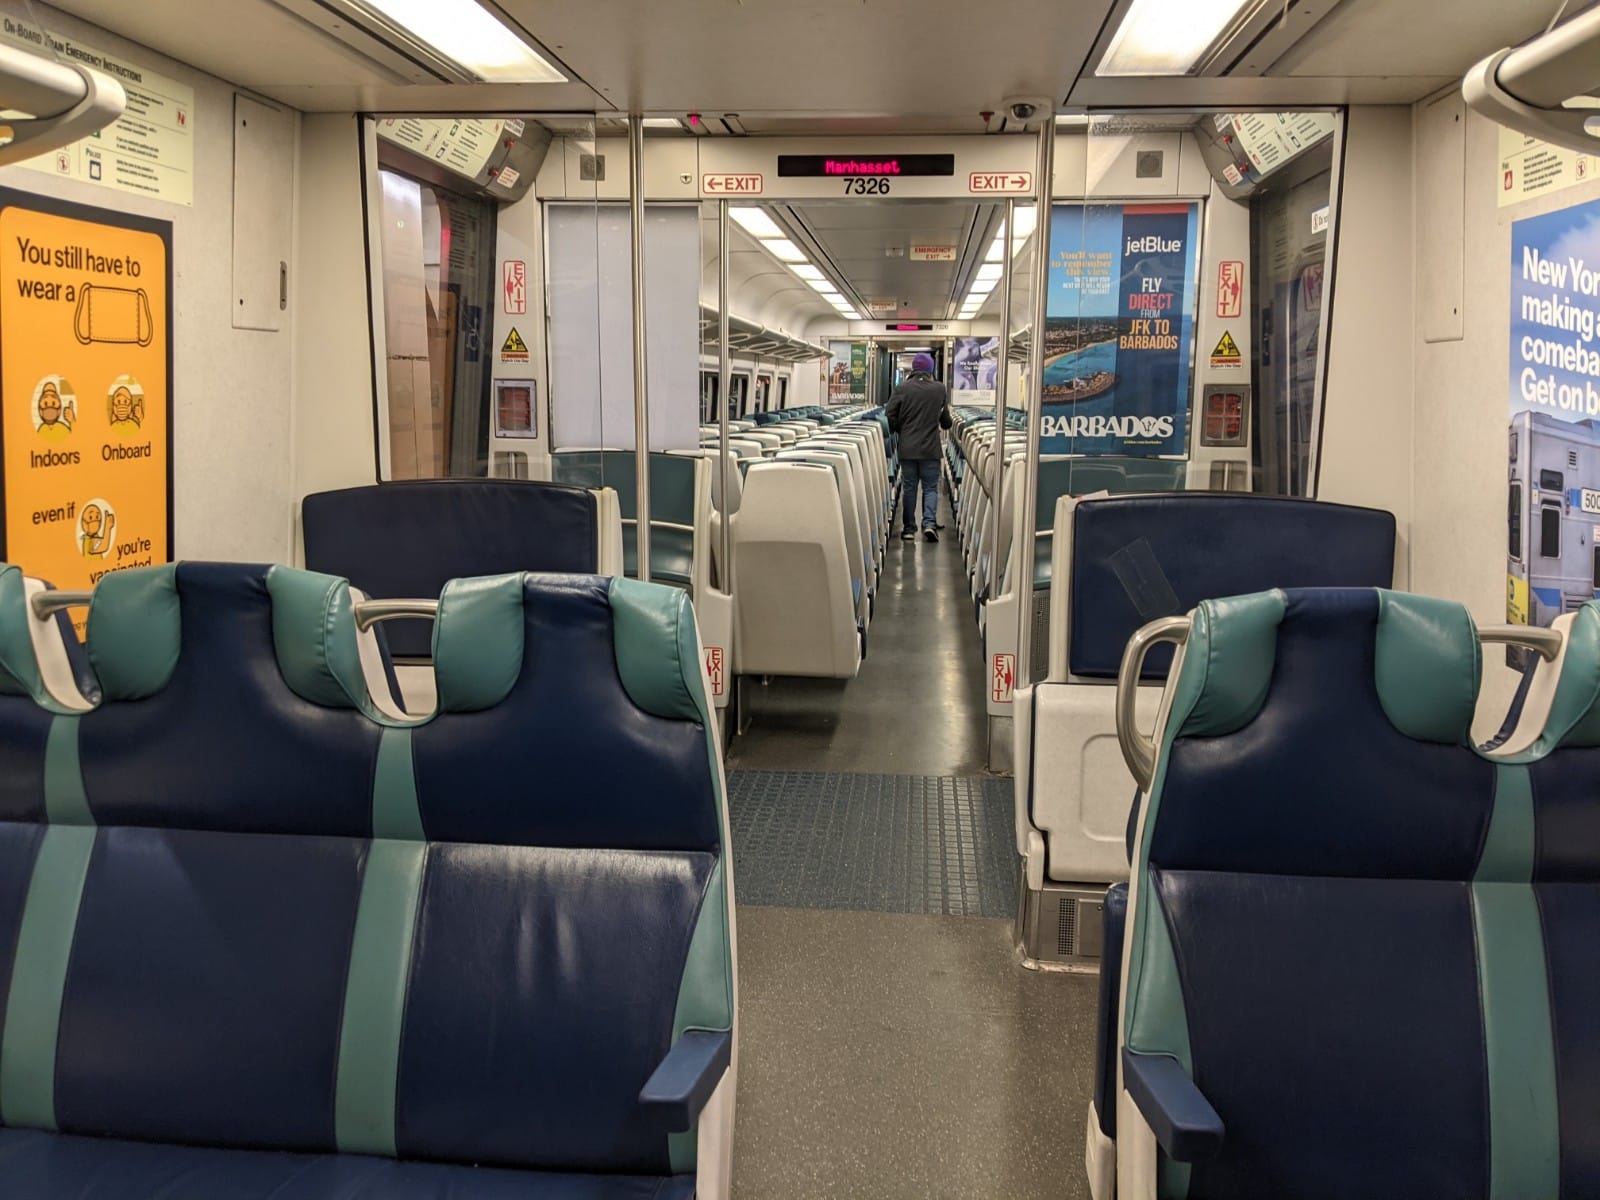 Getting from Manhattan to Flushing Queens in New York LIRR